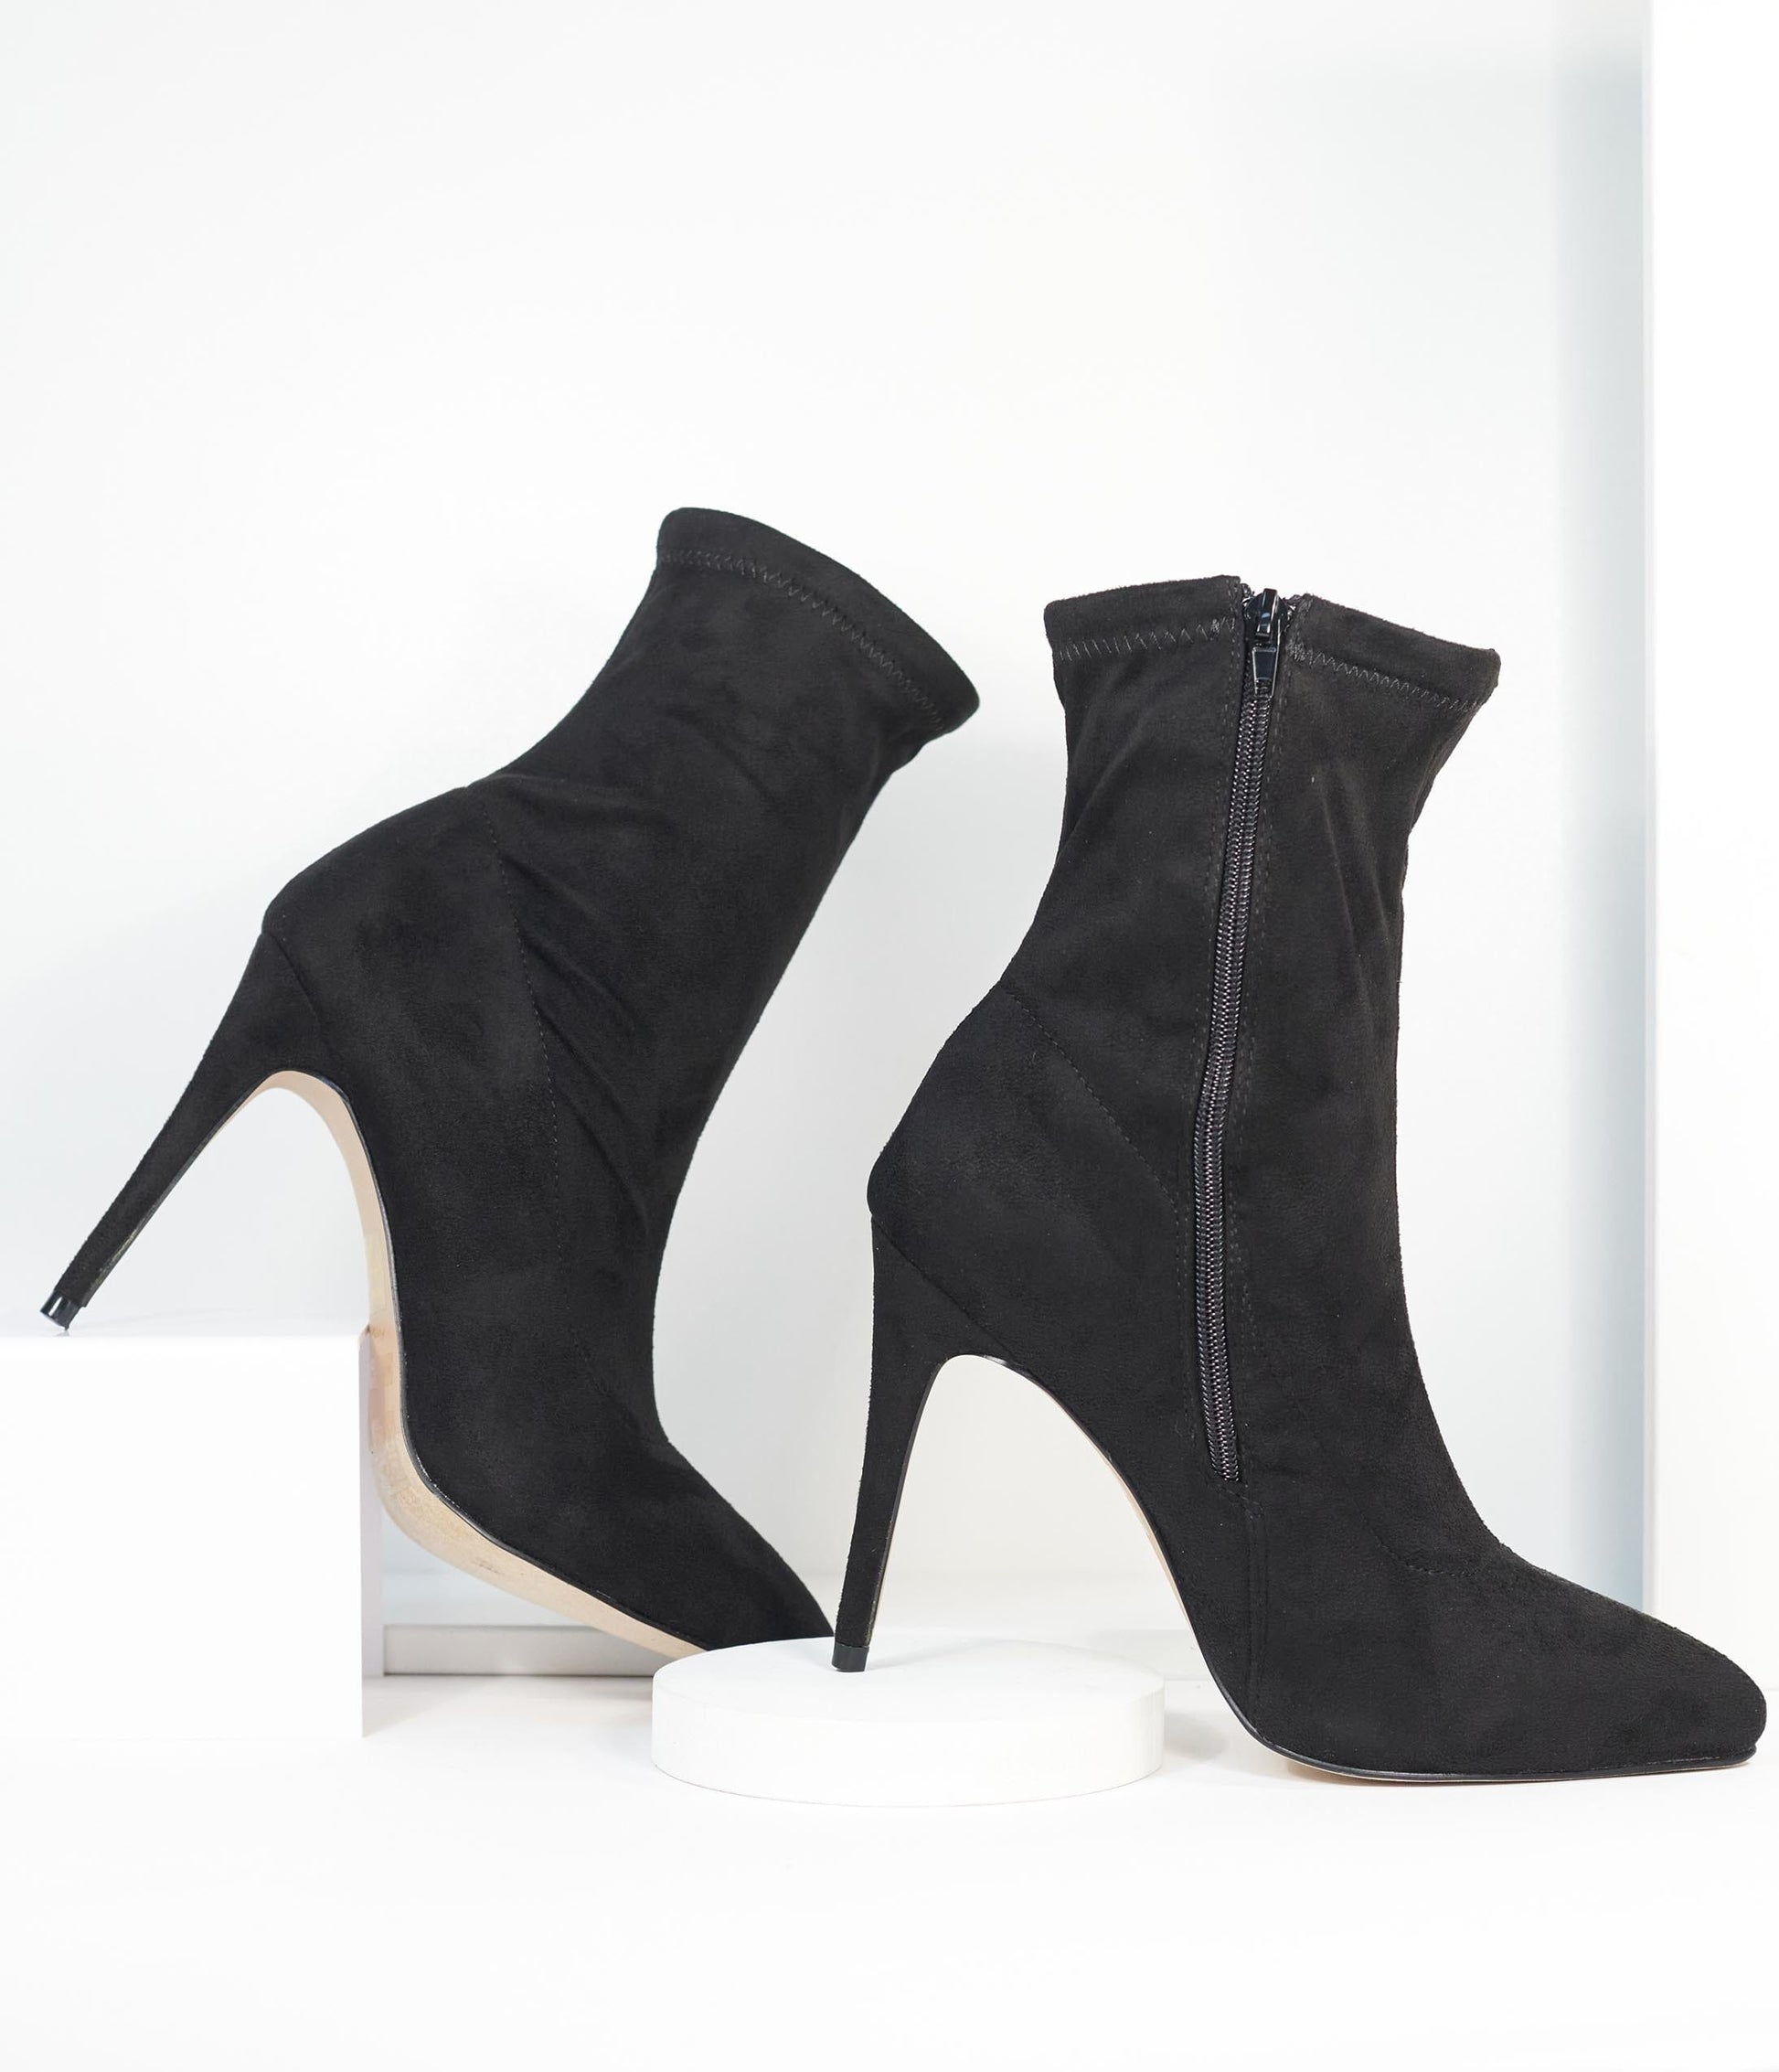 Black Suede High Stiletto Ankle Boots